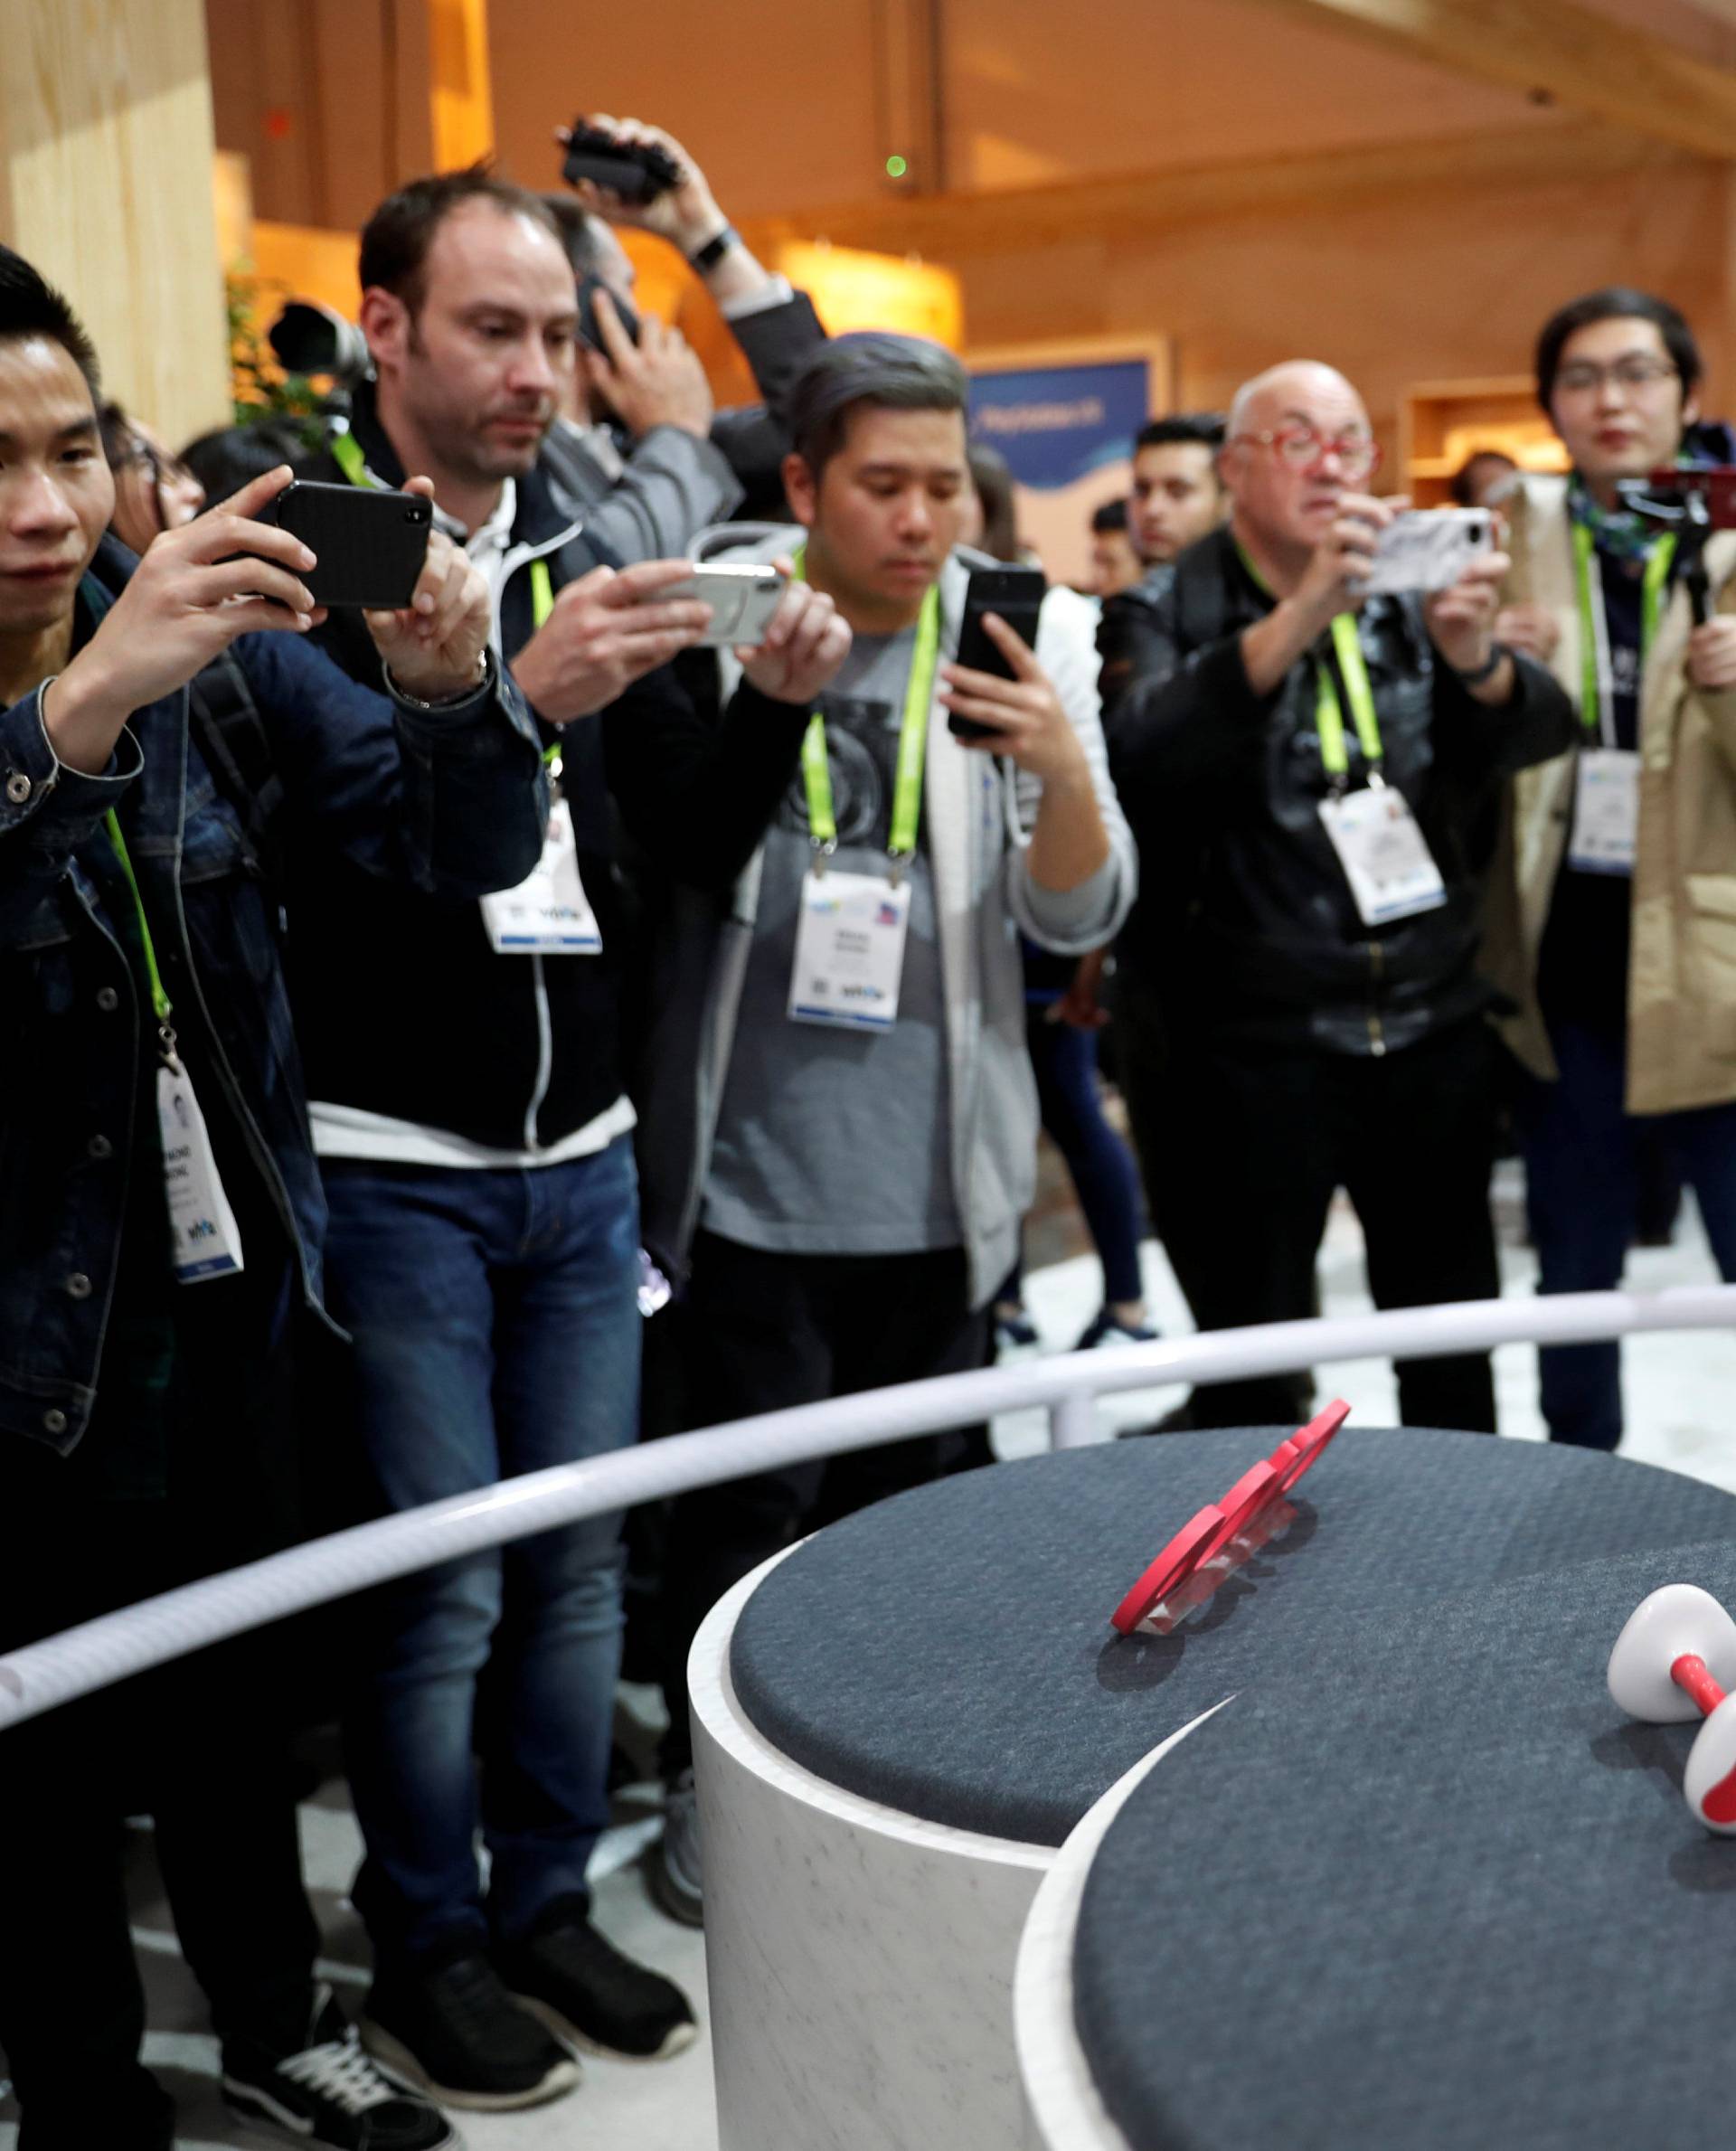 Journalists take photos of Aibo, a robotic dog, during a Sony news conference at the 2018 CES in Las Vegas